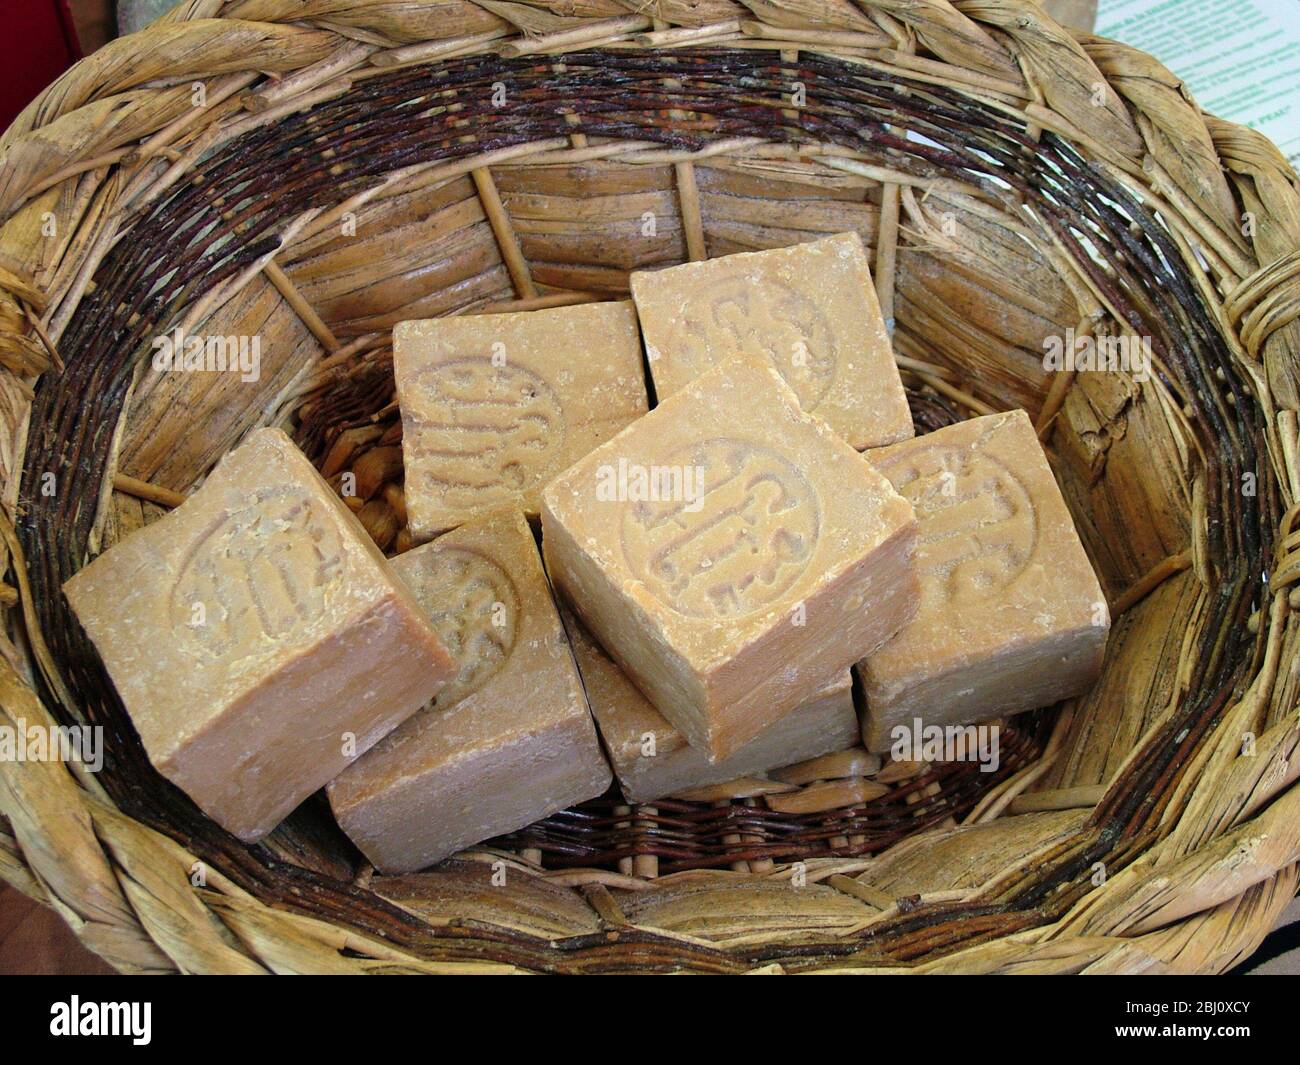 Blocks of soap for sale in French market at Menton south of France - Stock Photo